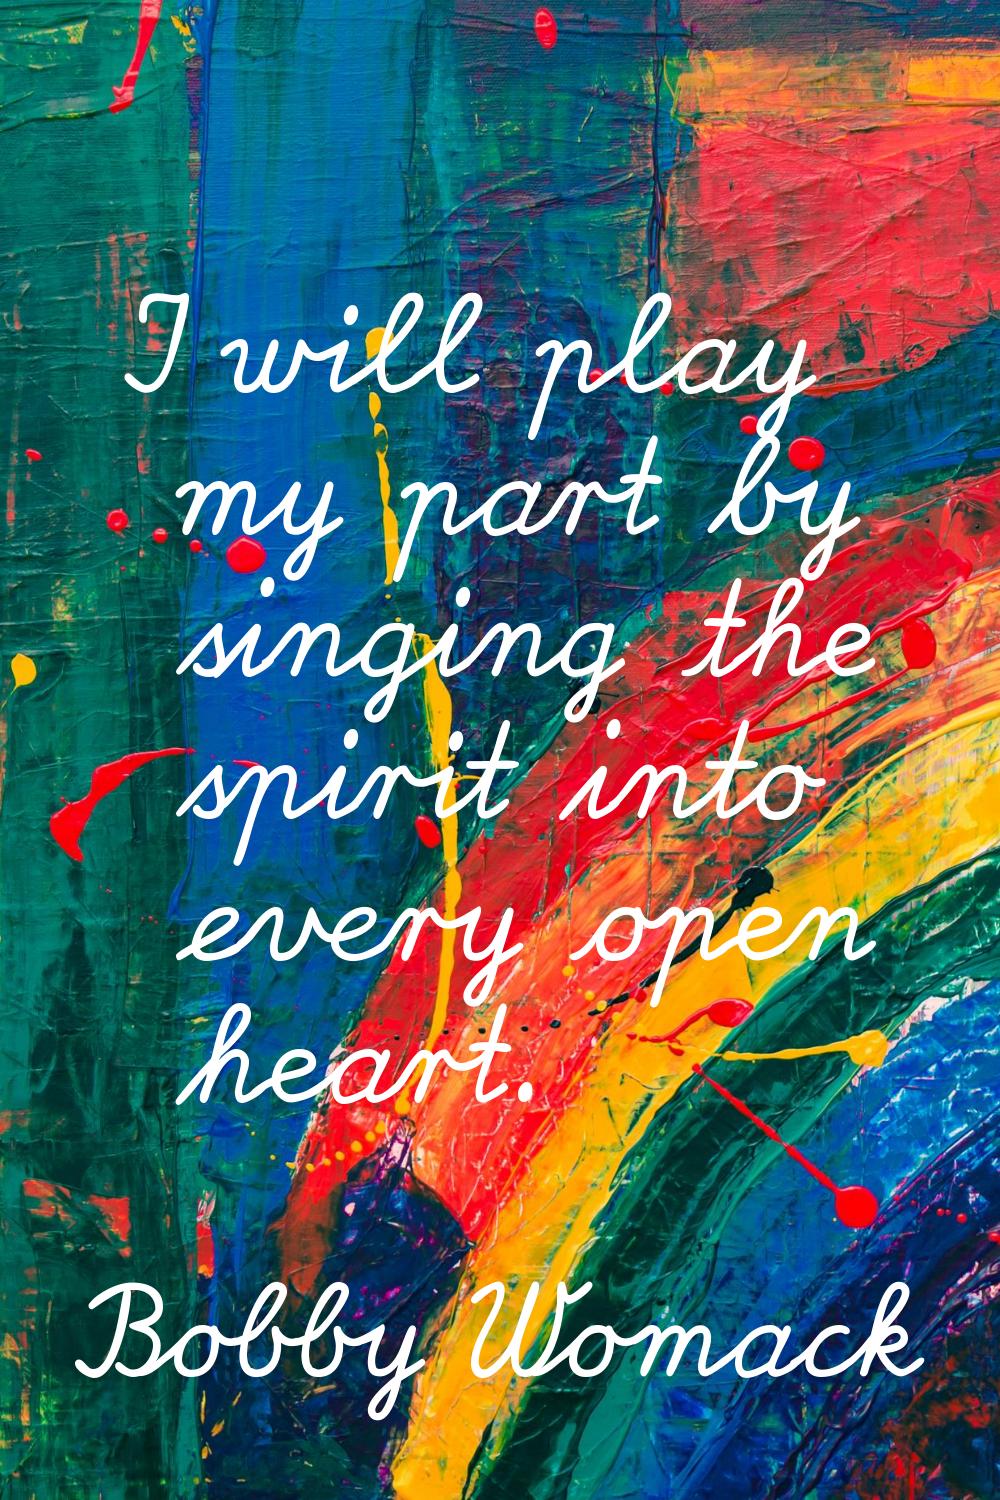 I will play my part by singing the spirit into every open heart.